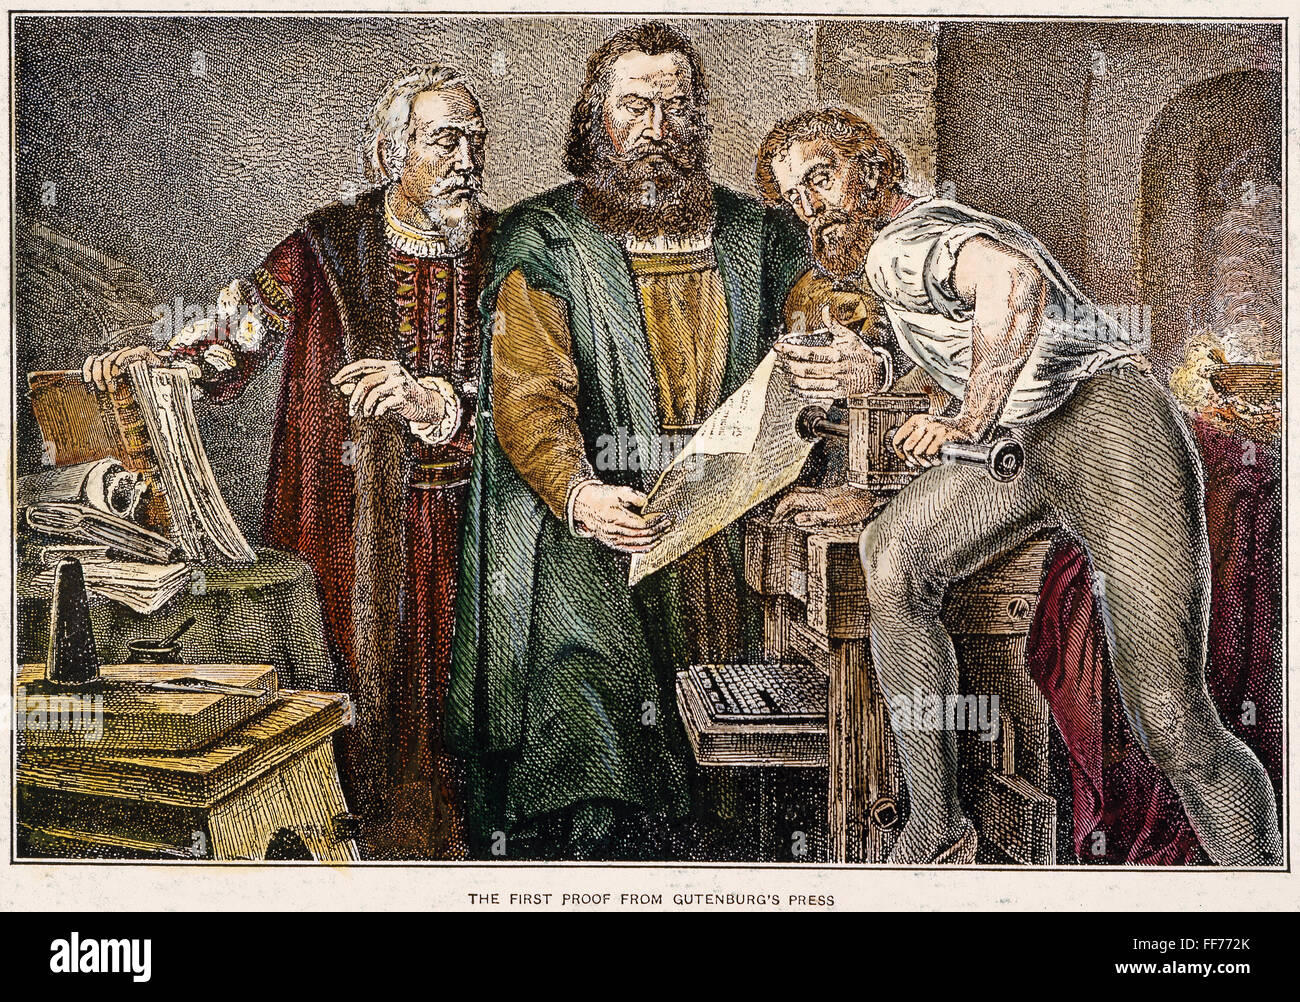 JOHANN GUTENBERG /n(c1395-1468) taking the first proof from his press. Colored engraving, 19th century. Stock Photo